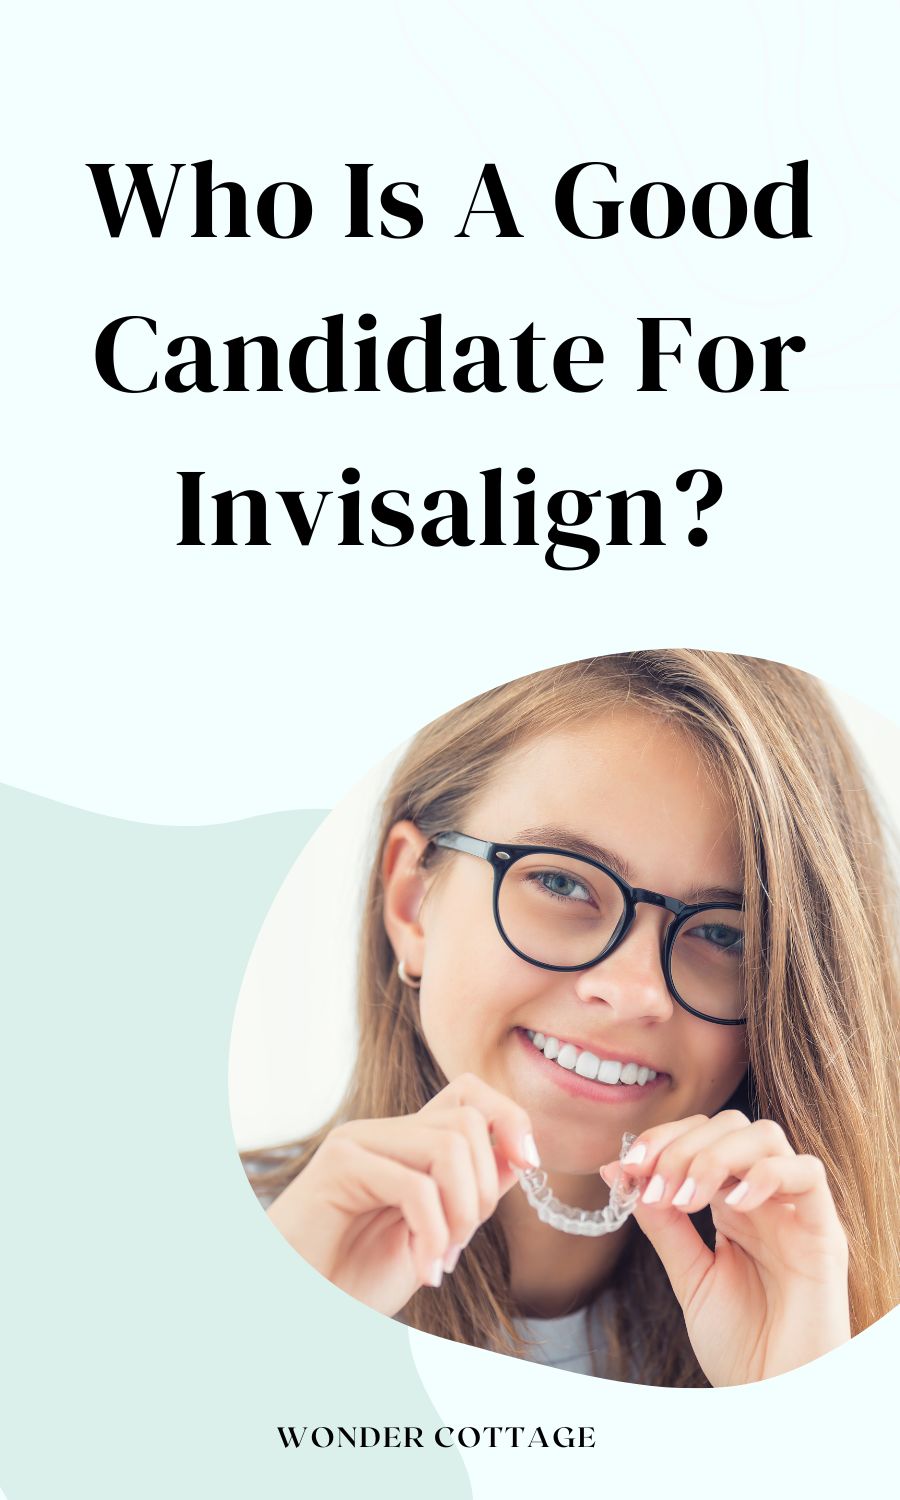 Who Is A Good Candidate For Invisalign?